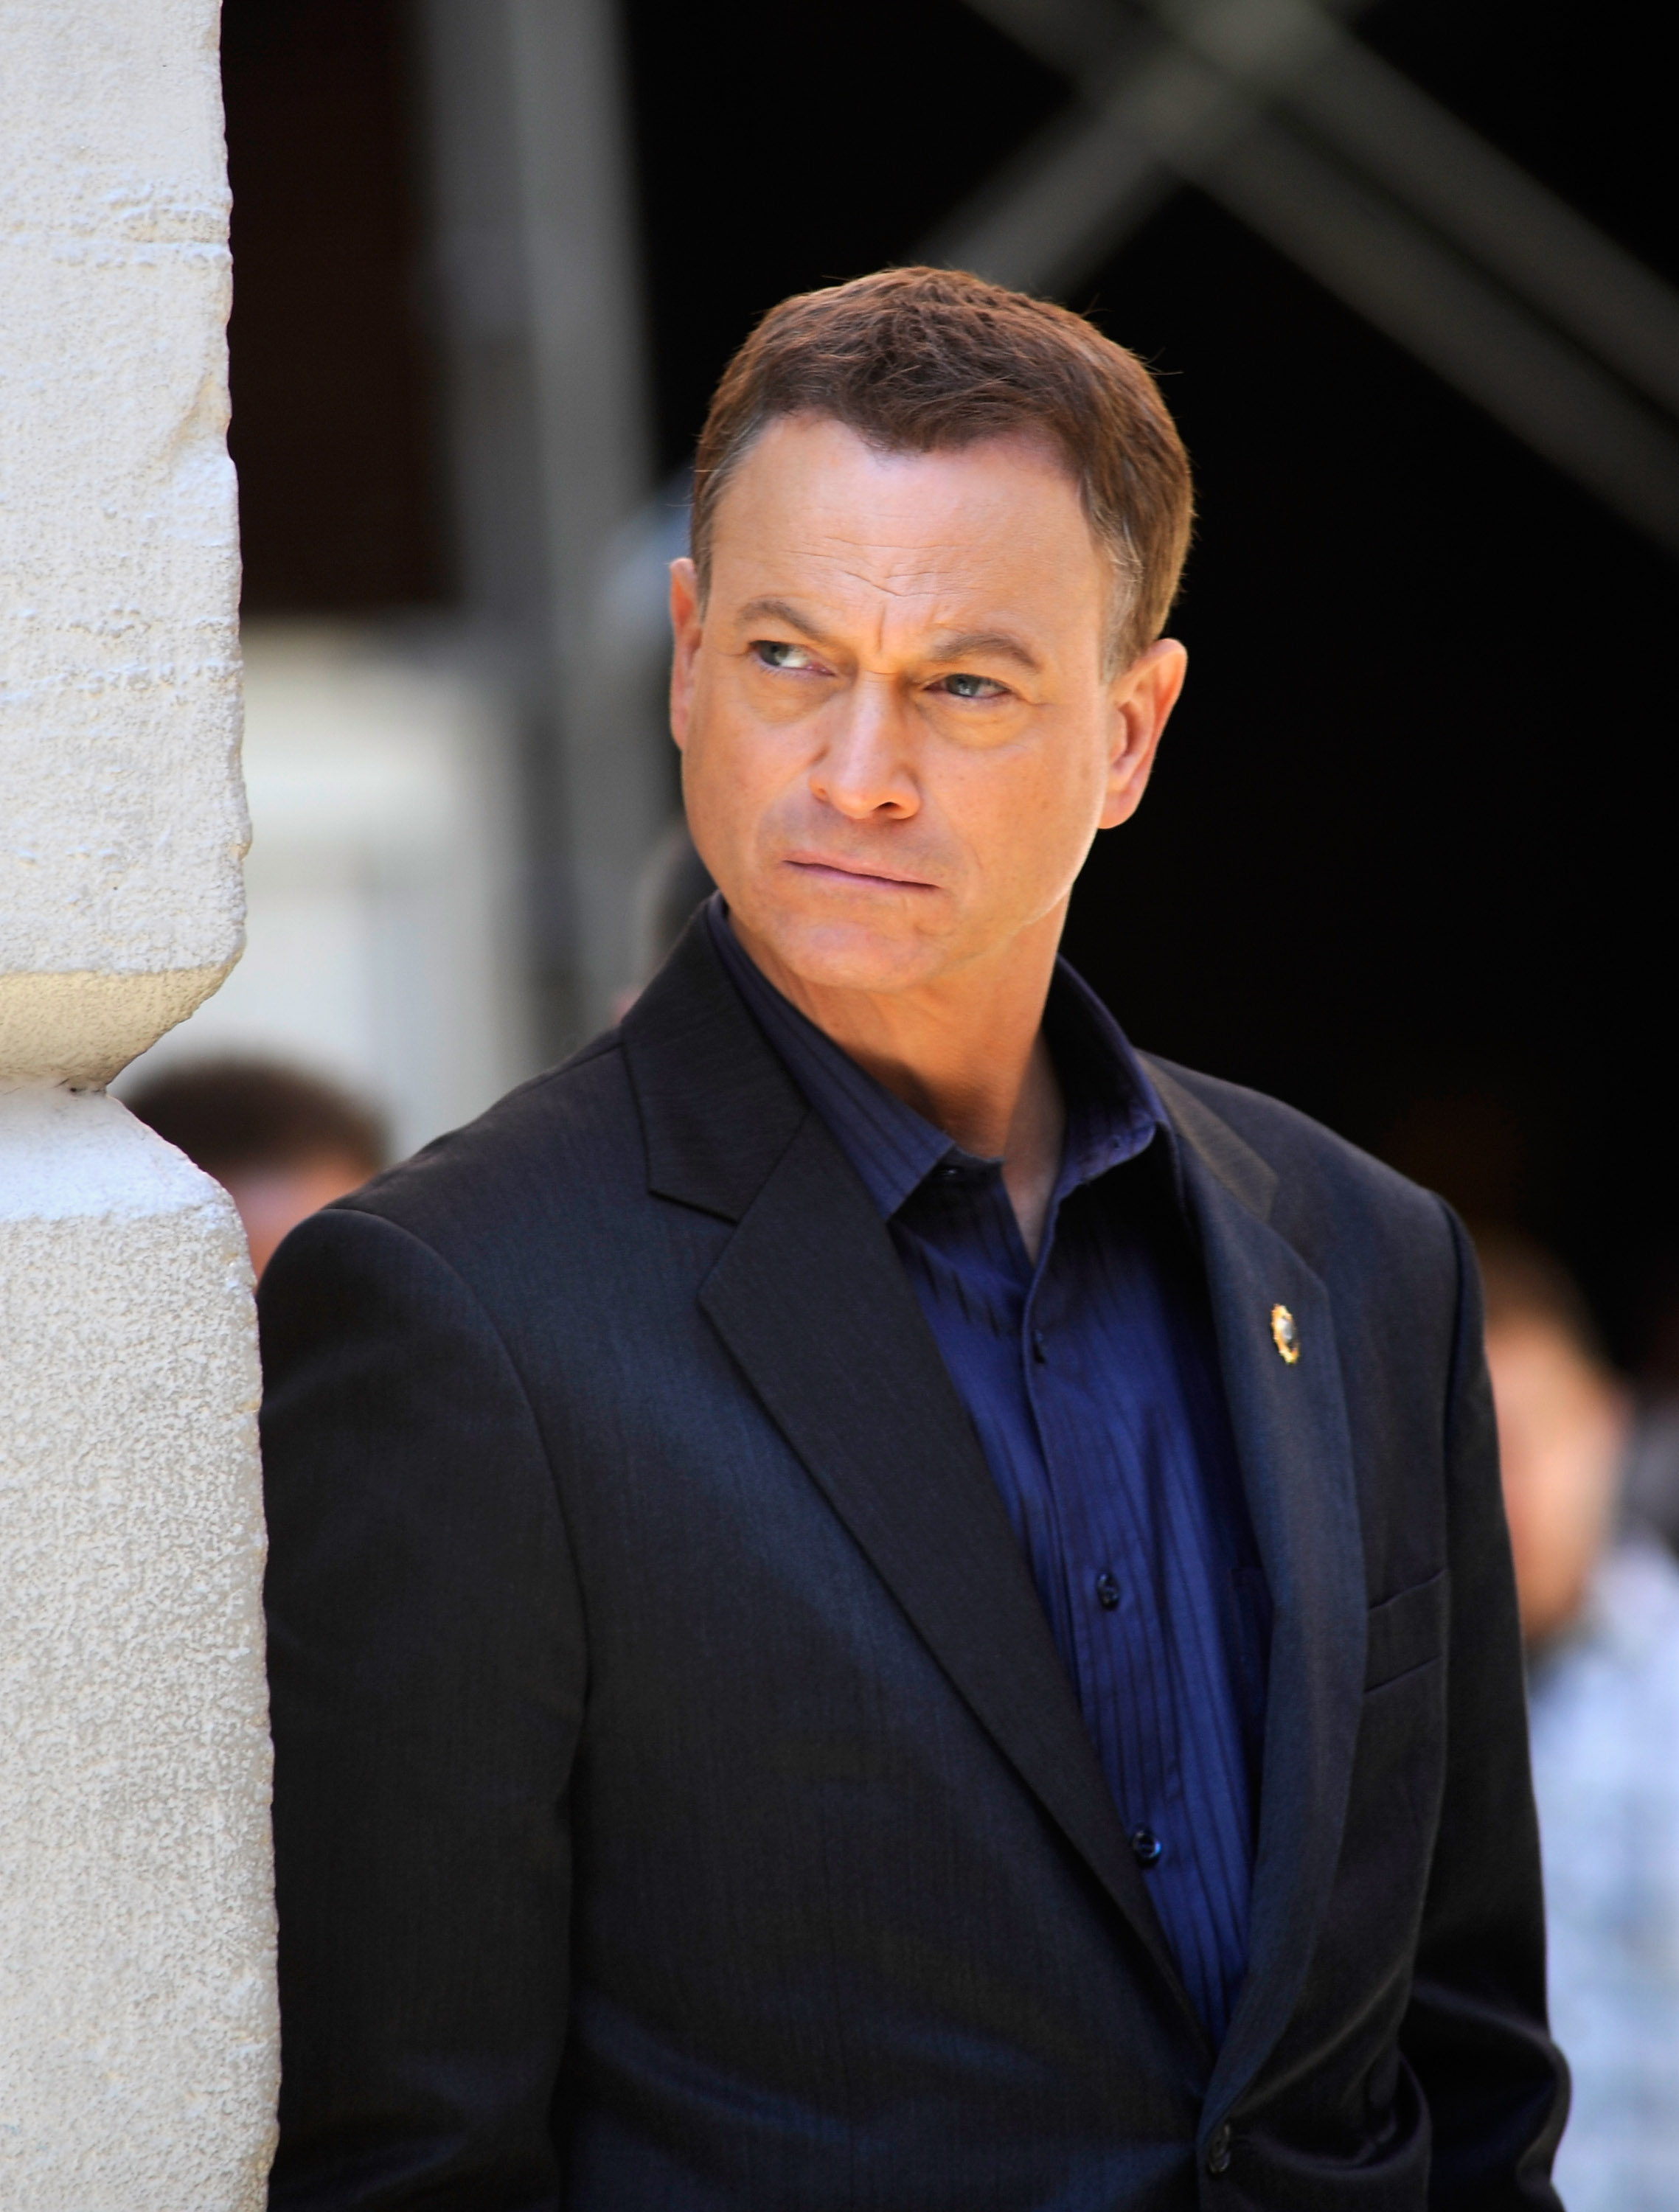 Gary Sinise filming on location for "CSI: New York" in New York City, on October 1, 2012. | Source: Getty Images